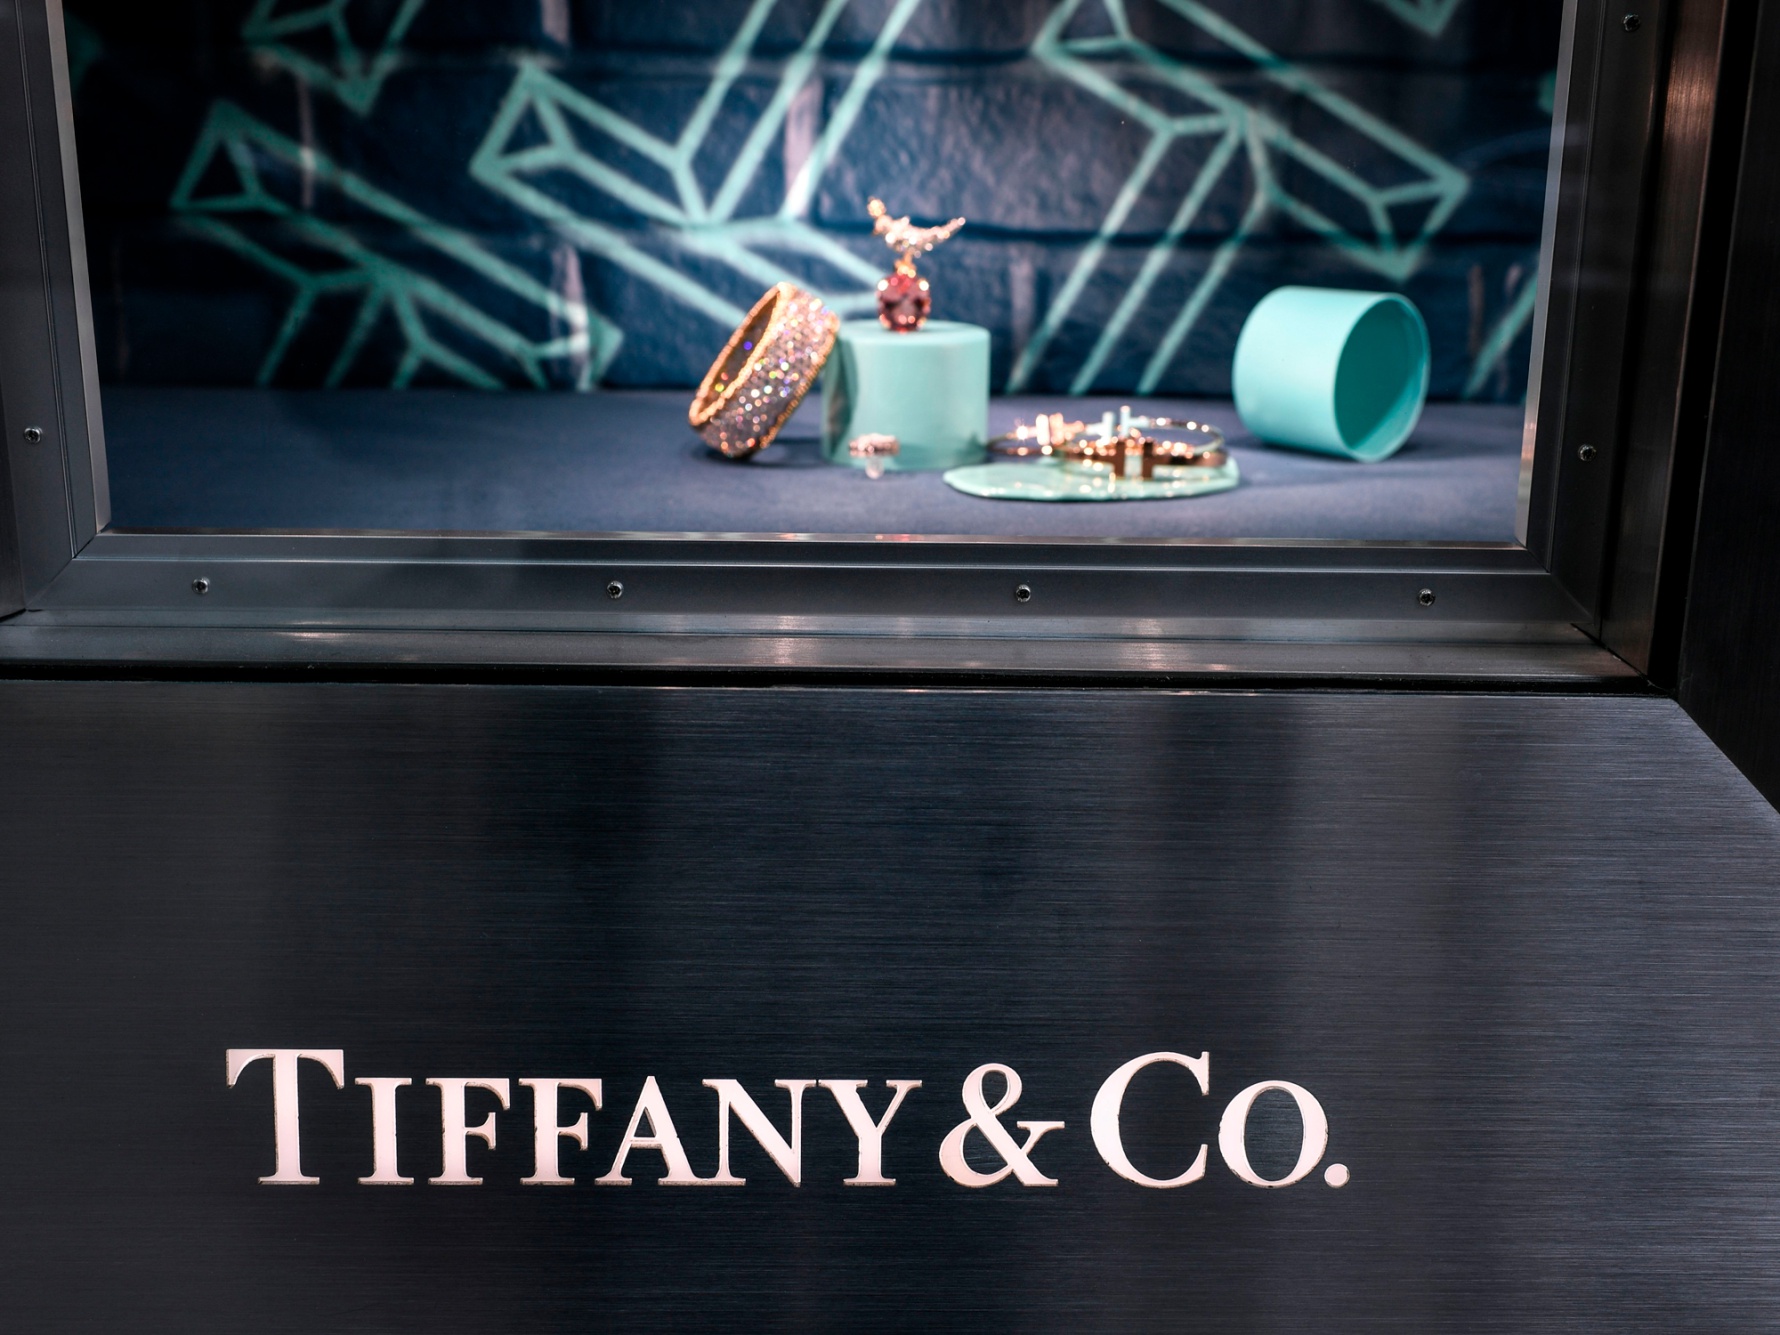 Louis Vuitton Bought Tiffany And Co